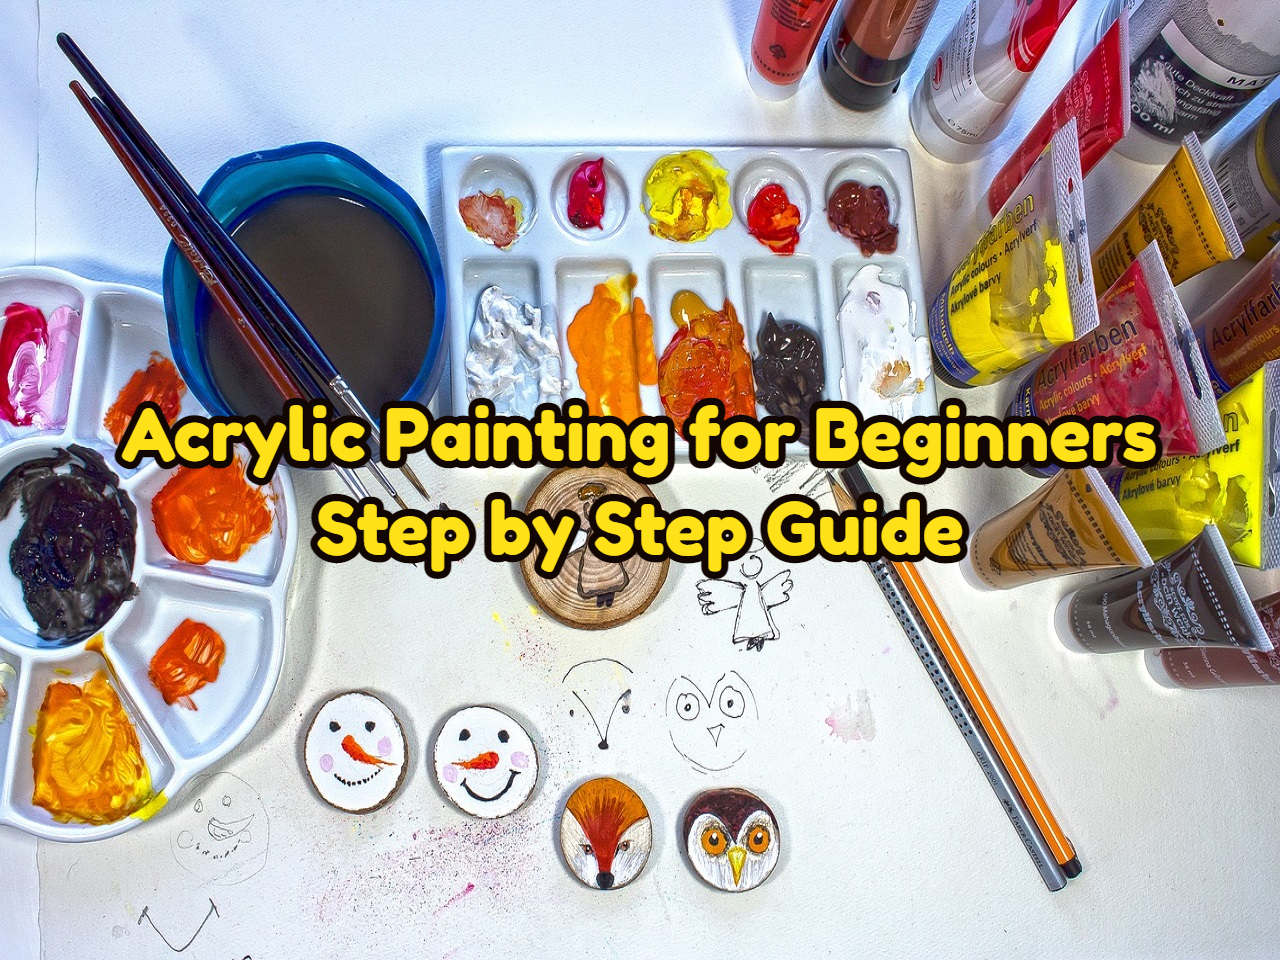 Acrylic Painting for Beginners: Step-by-Step Guide